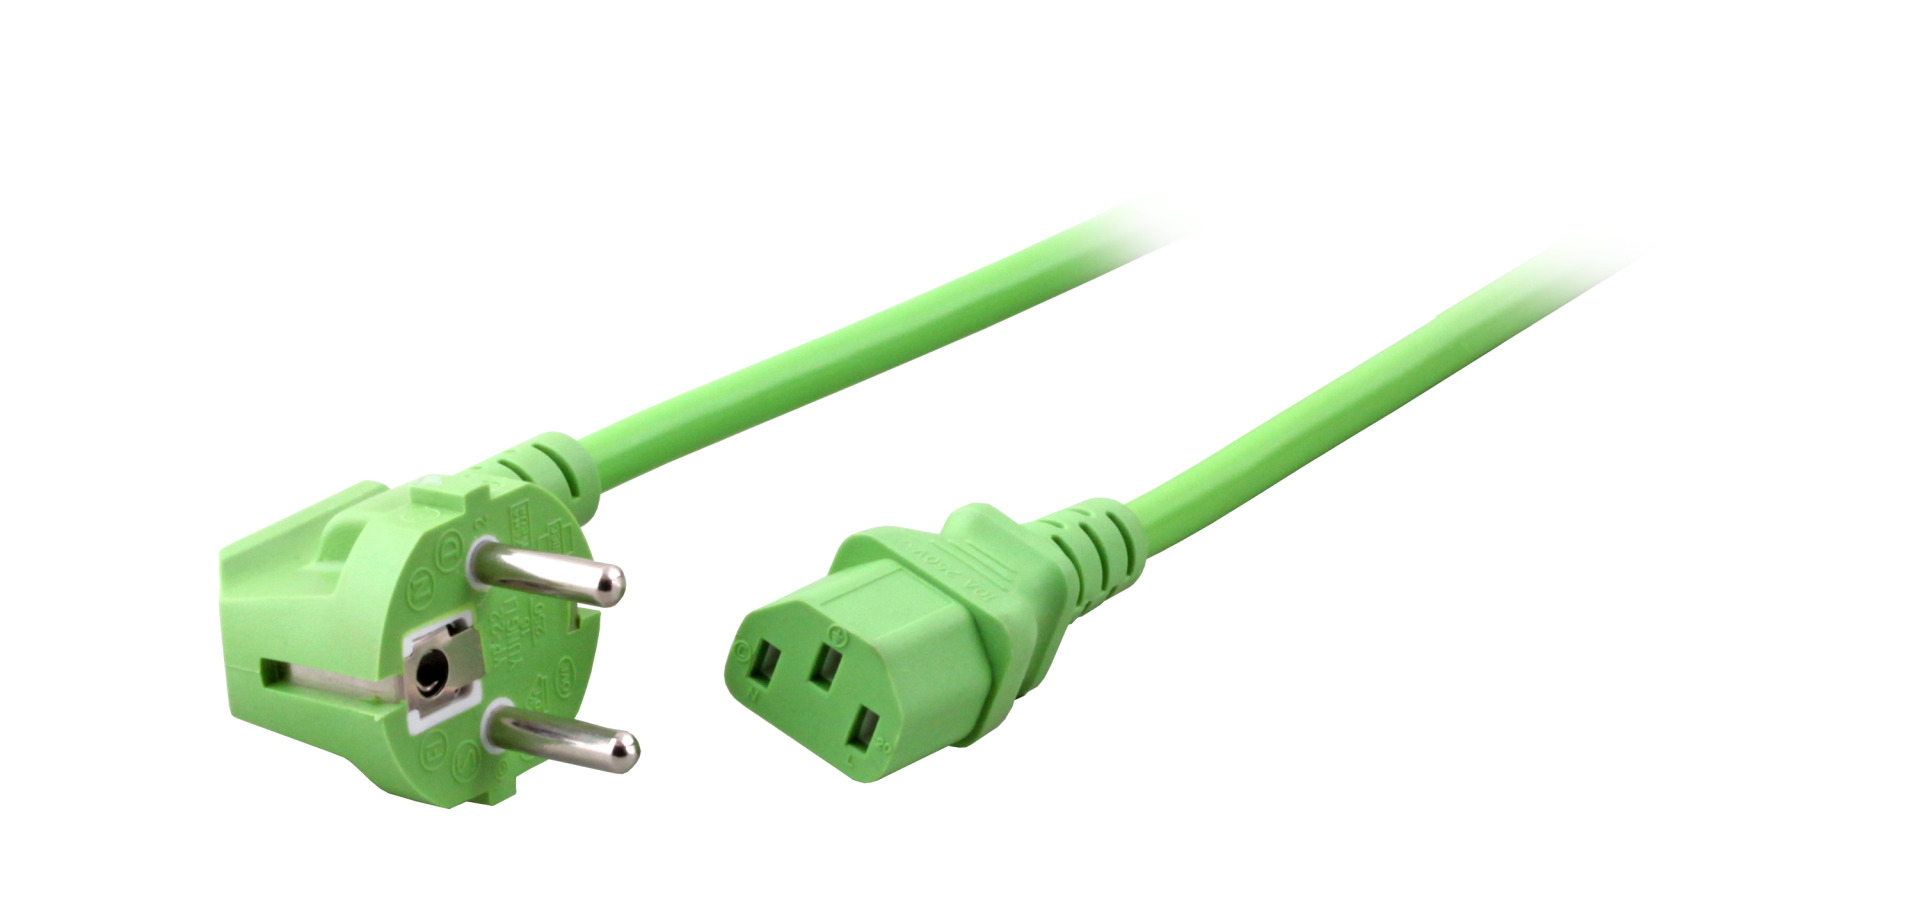 Power Cable CEE7/7 90° - C13 180°, Green, 1.8 m, 3 x 0.75 mm²